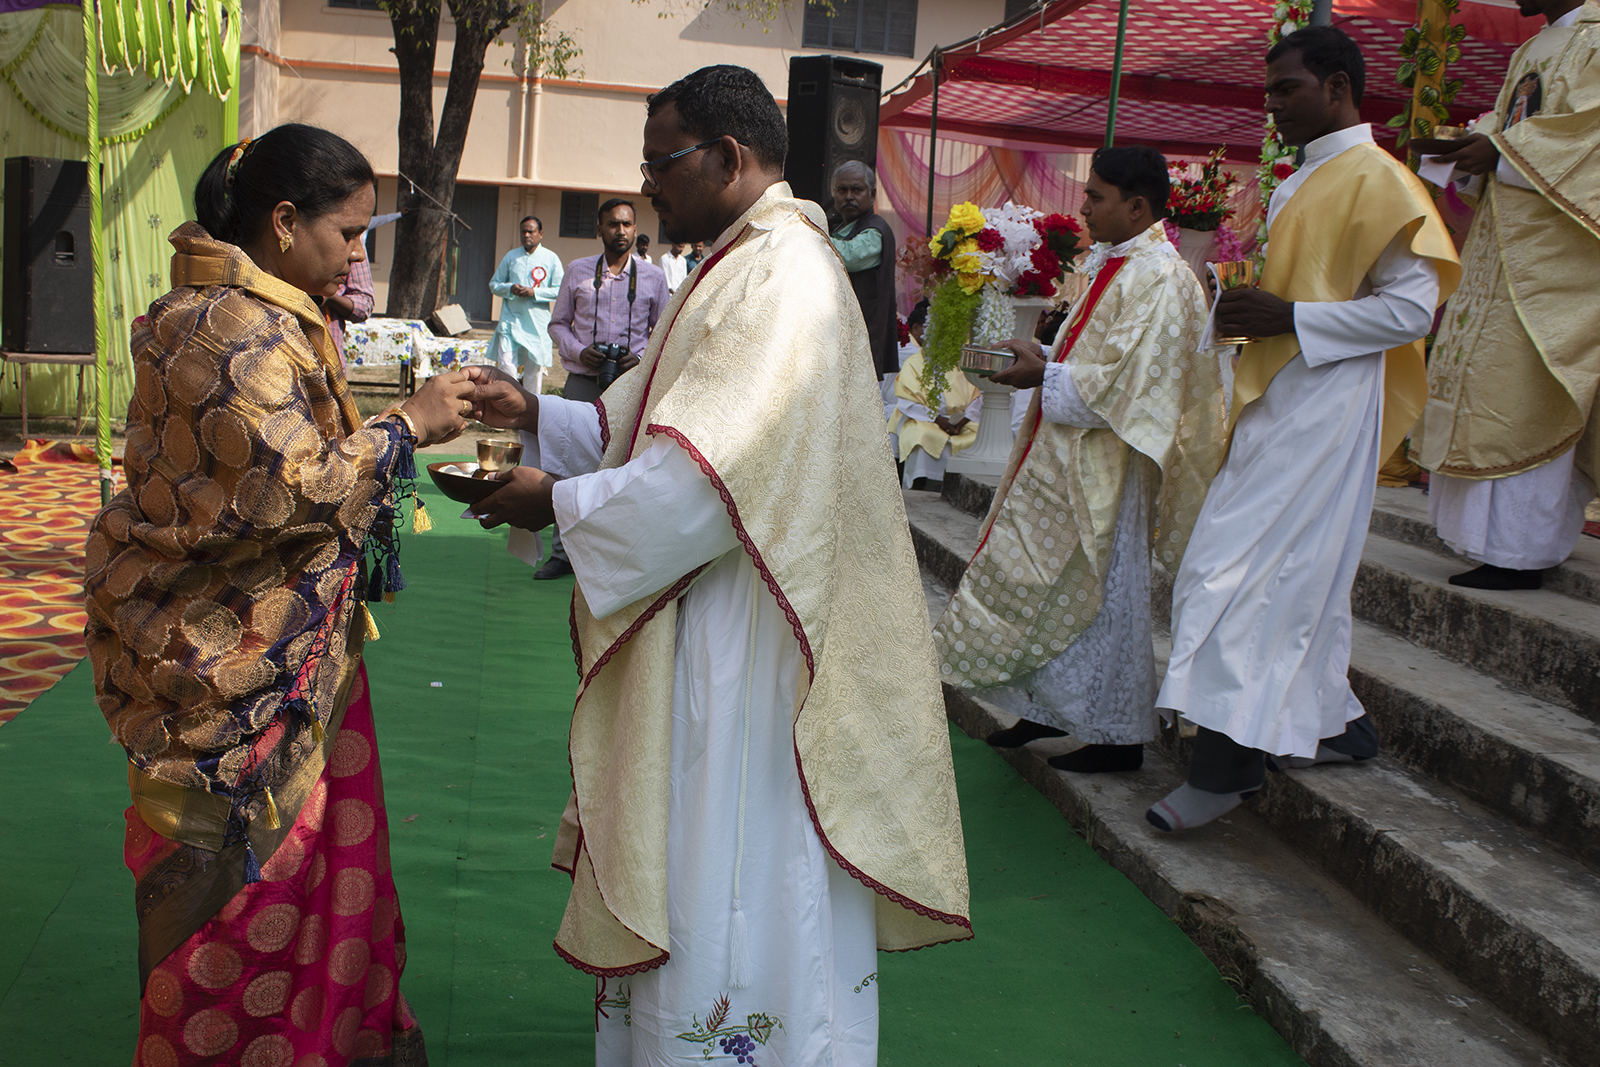 Father Vikas Nayak offers Holy Communion to his aunt following his ordination ceremony at the Church of the Ascension of the Lord in Buxar, India, in Nov. 2021. Photo by Abhijeet Nayak